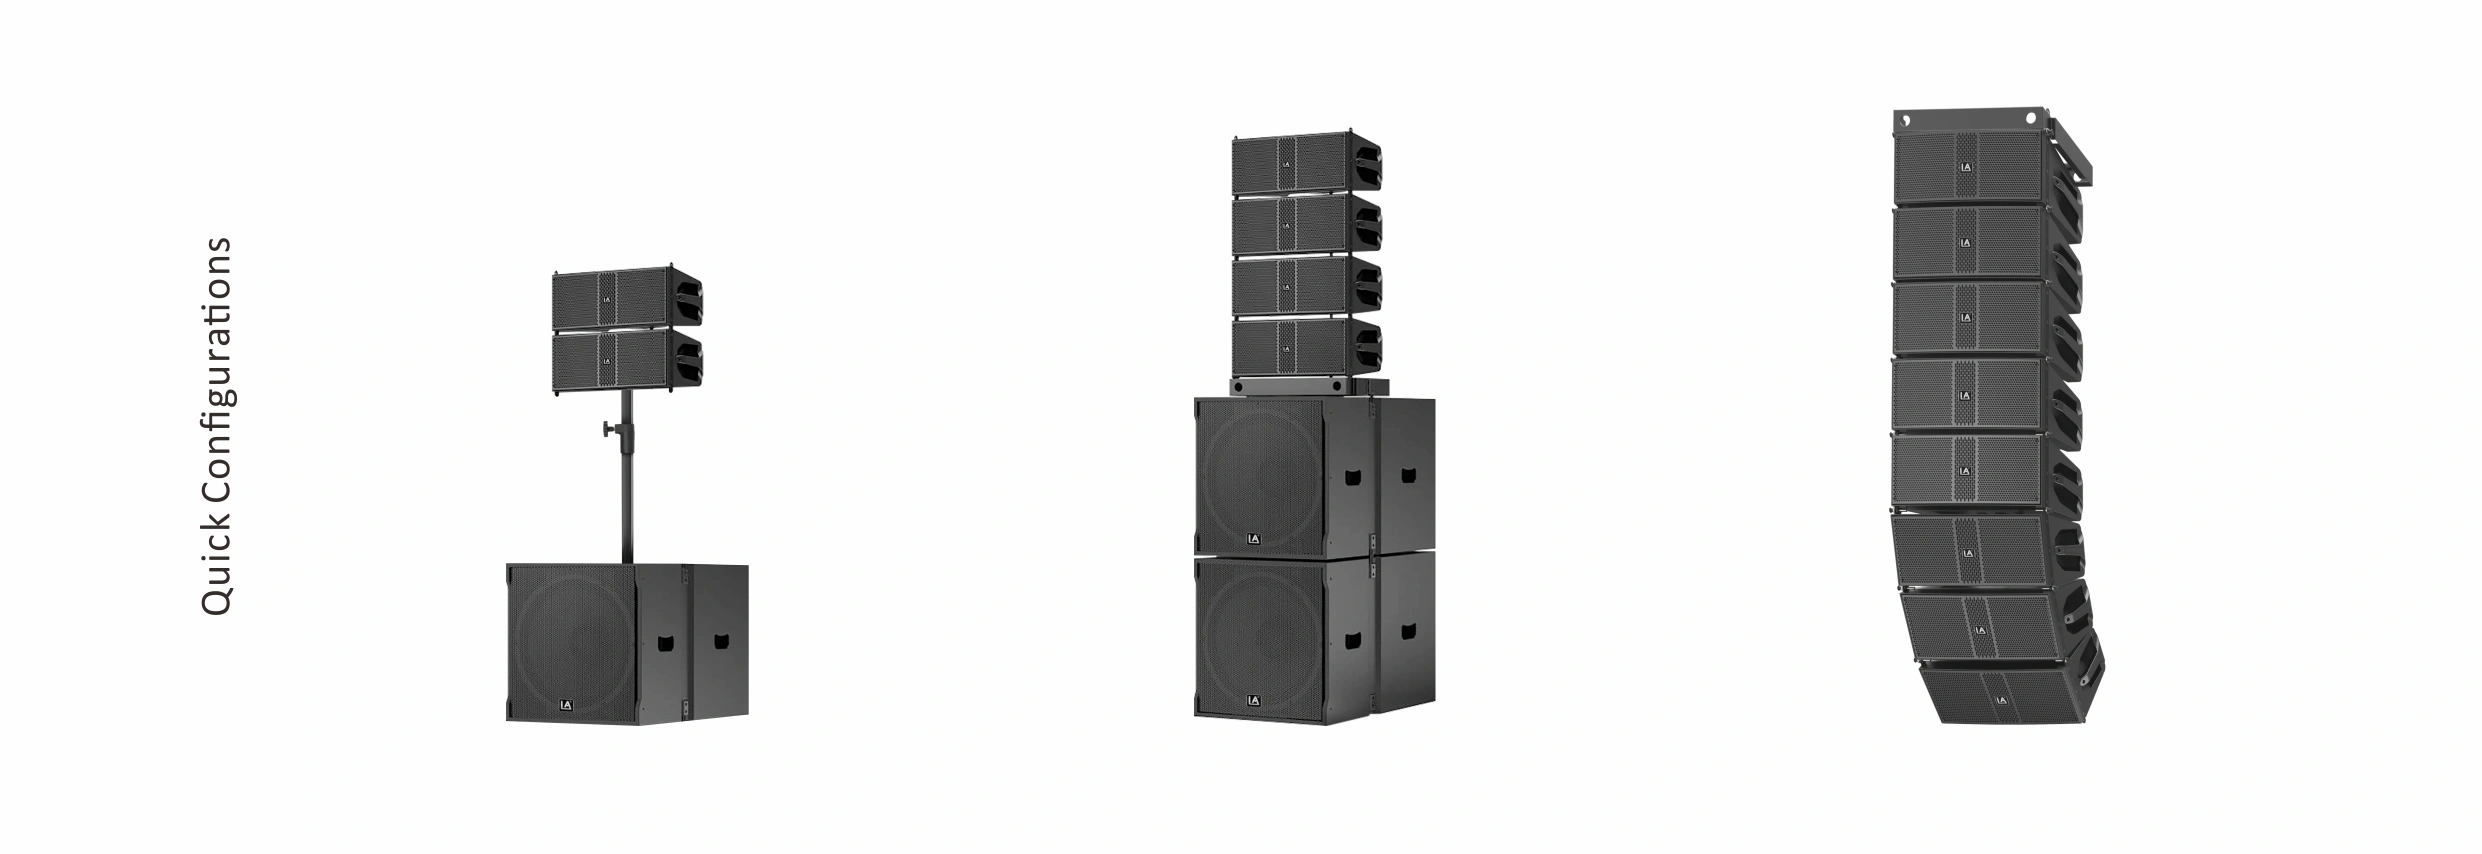 active line array system,Line array speakers,line array active system,active line array china,active line array loudspeaker